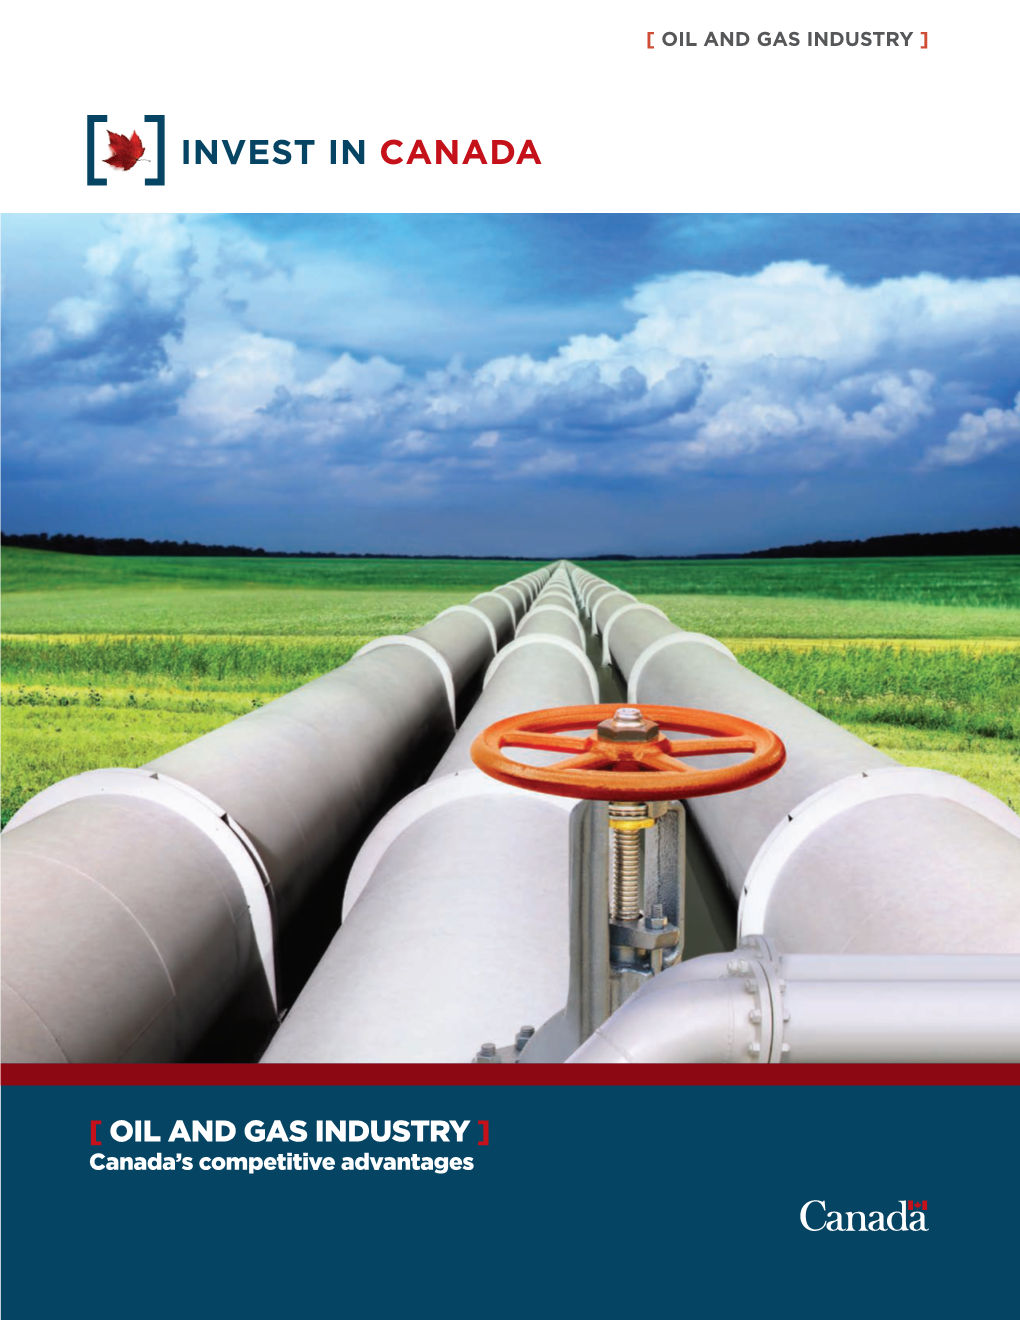 [ Oil and Gas Industry ] Support Programs Invest in Canada to and Innovation Achieve Global Excellence